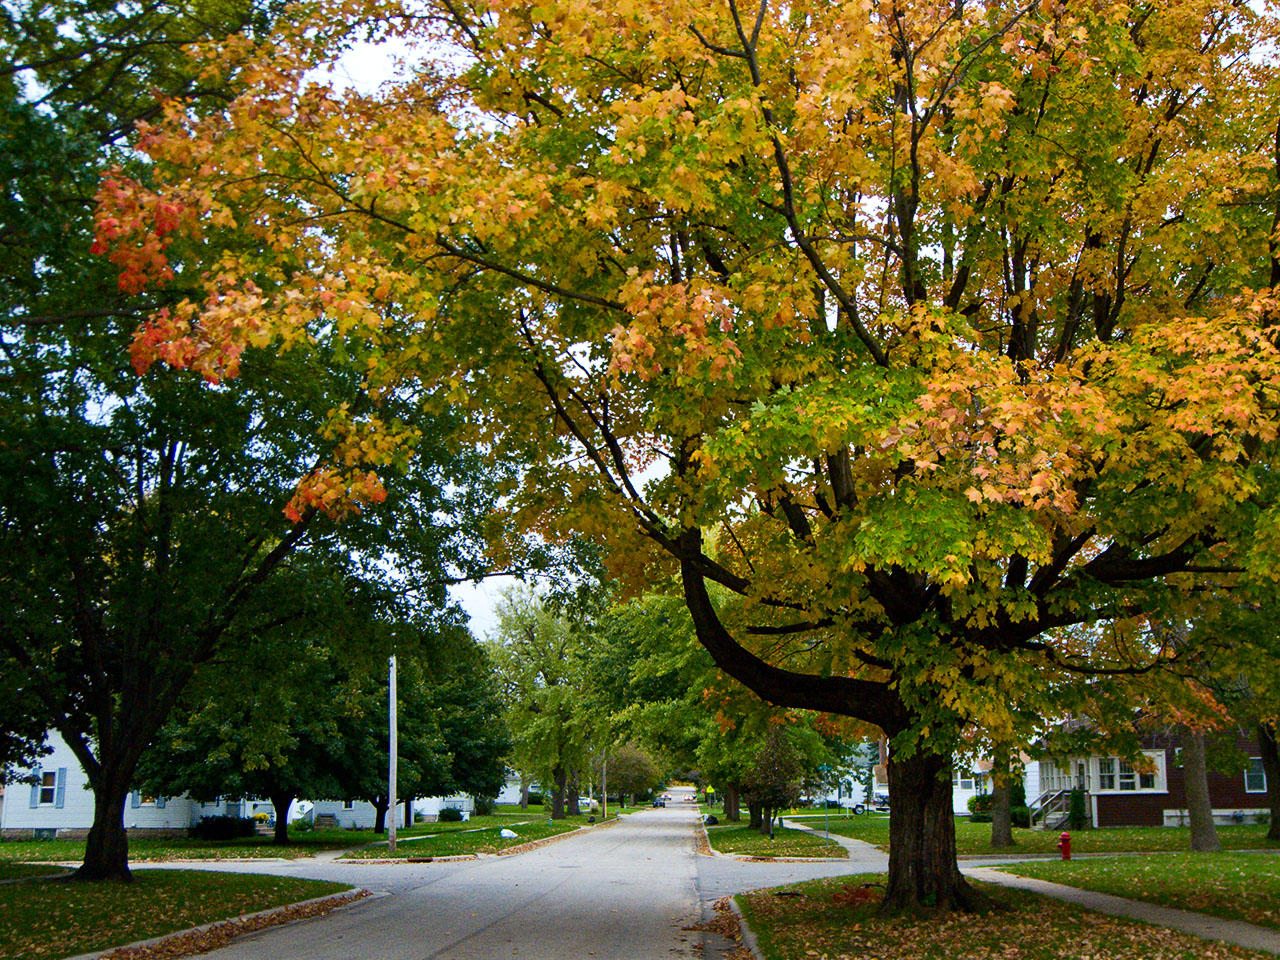 a wide street with leaf strewn trees lining the edge